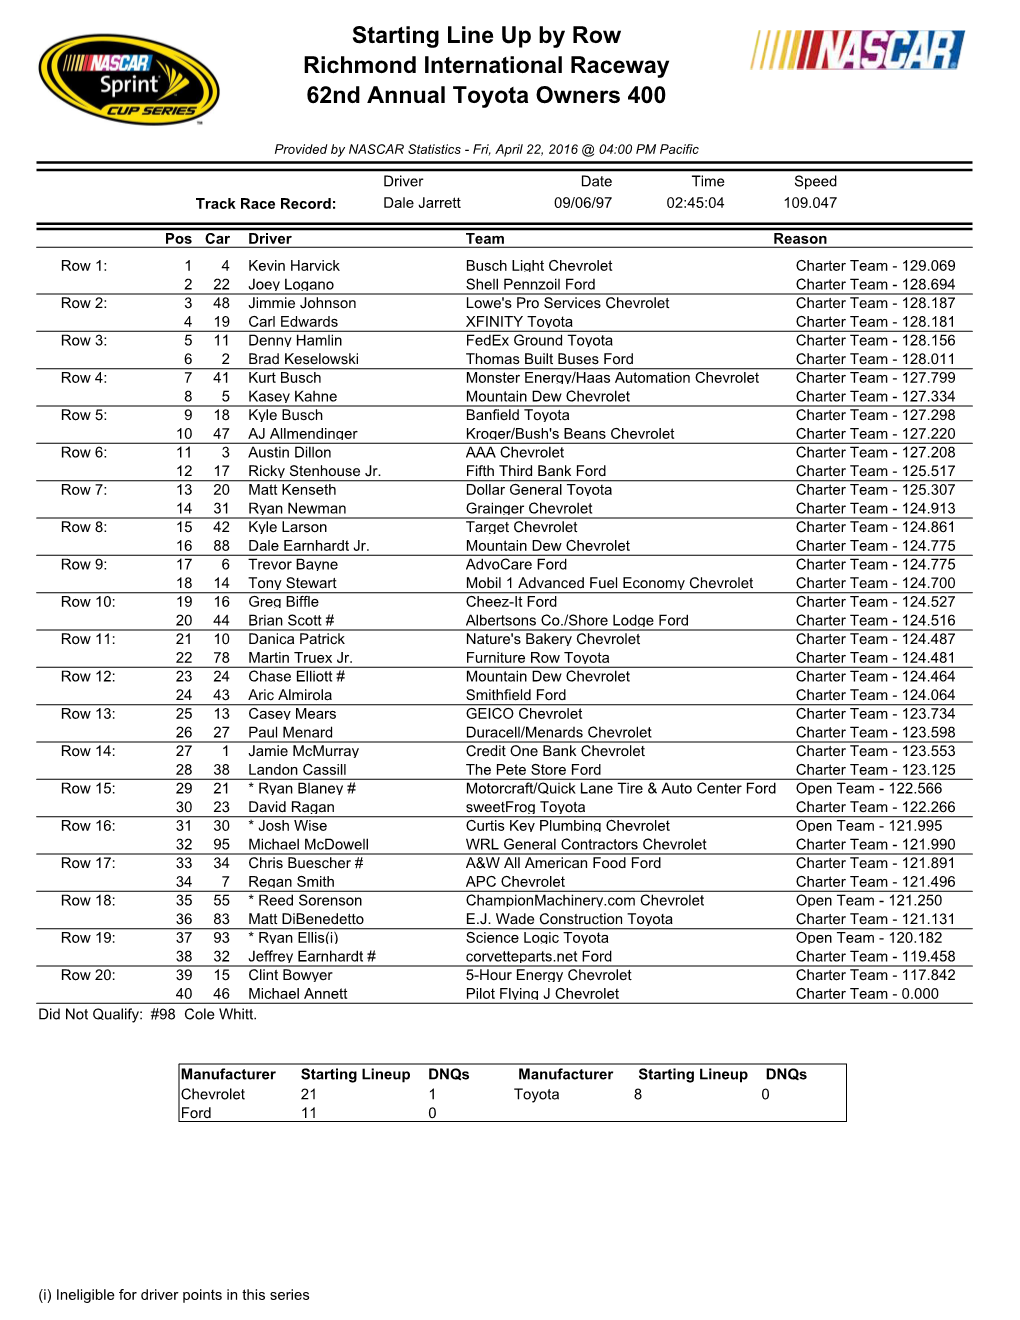 Starting Line up by Row Richmond International Raceway 62Nd Annual Toyota Owners 400